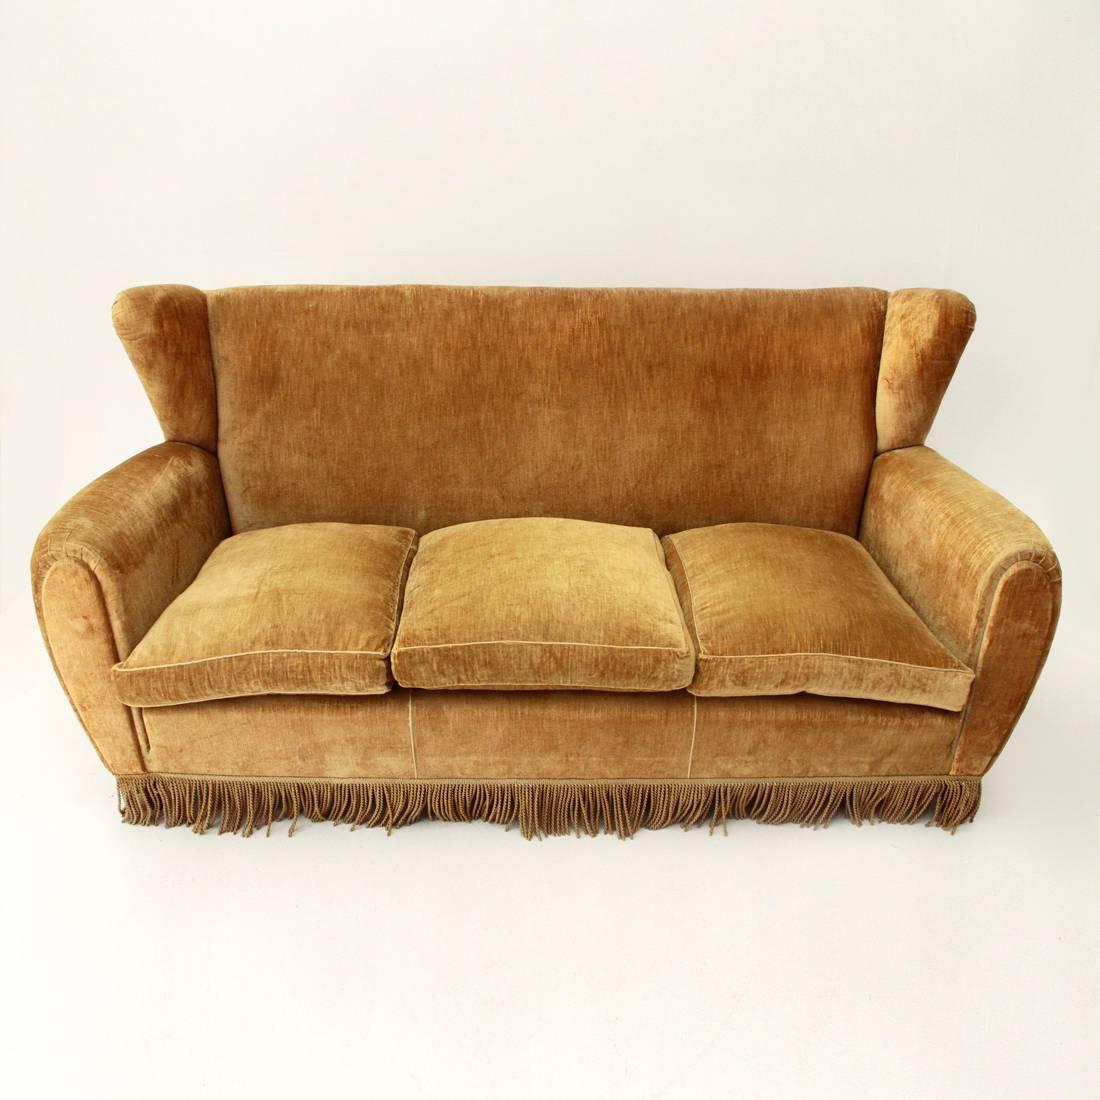 Sofa produced in the 1950s by Poltrona Frau.
Wooden structure padded and lined in velvet.
Sitting with cushions padded in goose feather.
Conical shaped turned wood legs.
Structure in good condition, fabric slightly threadbare in some